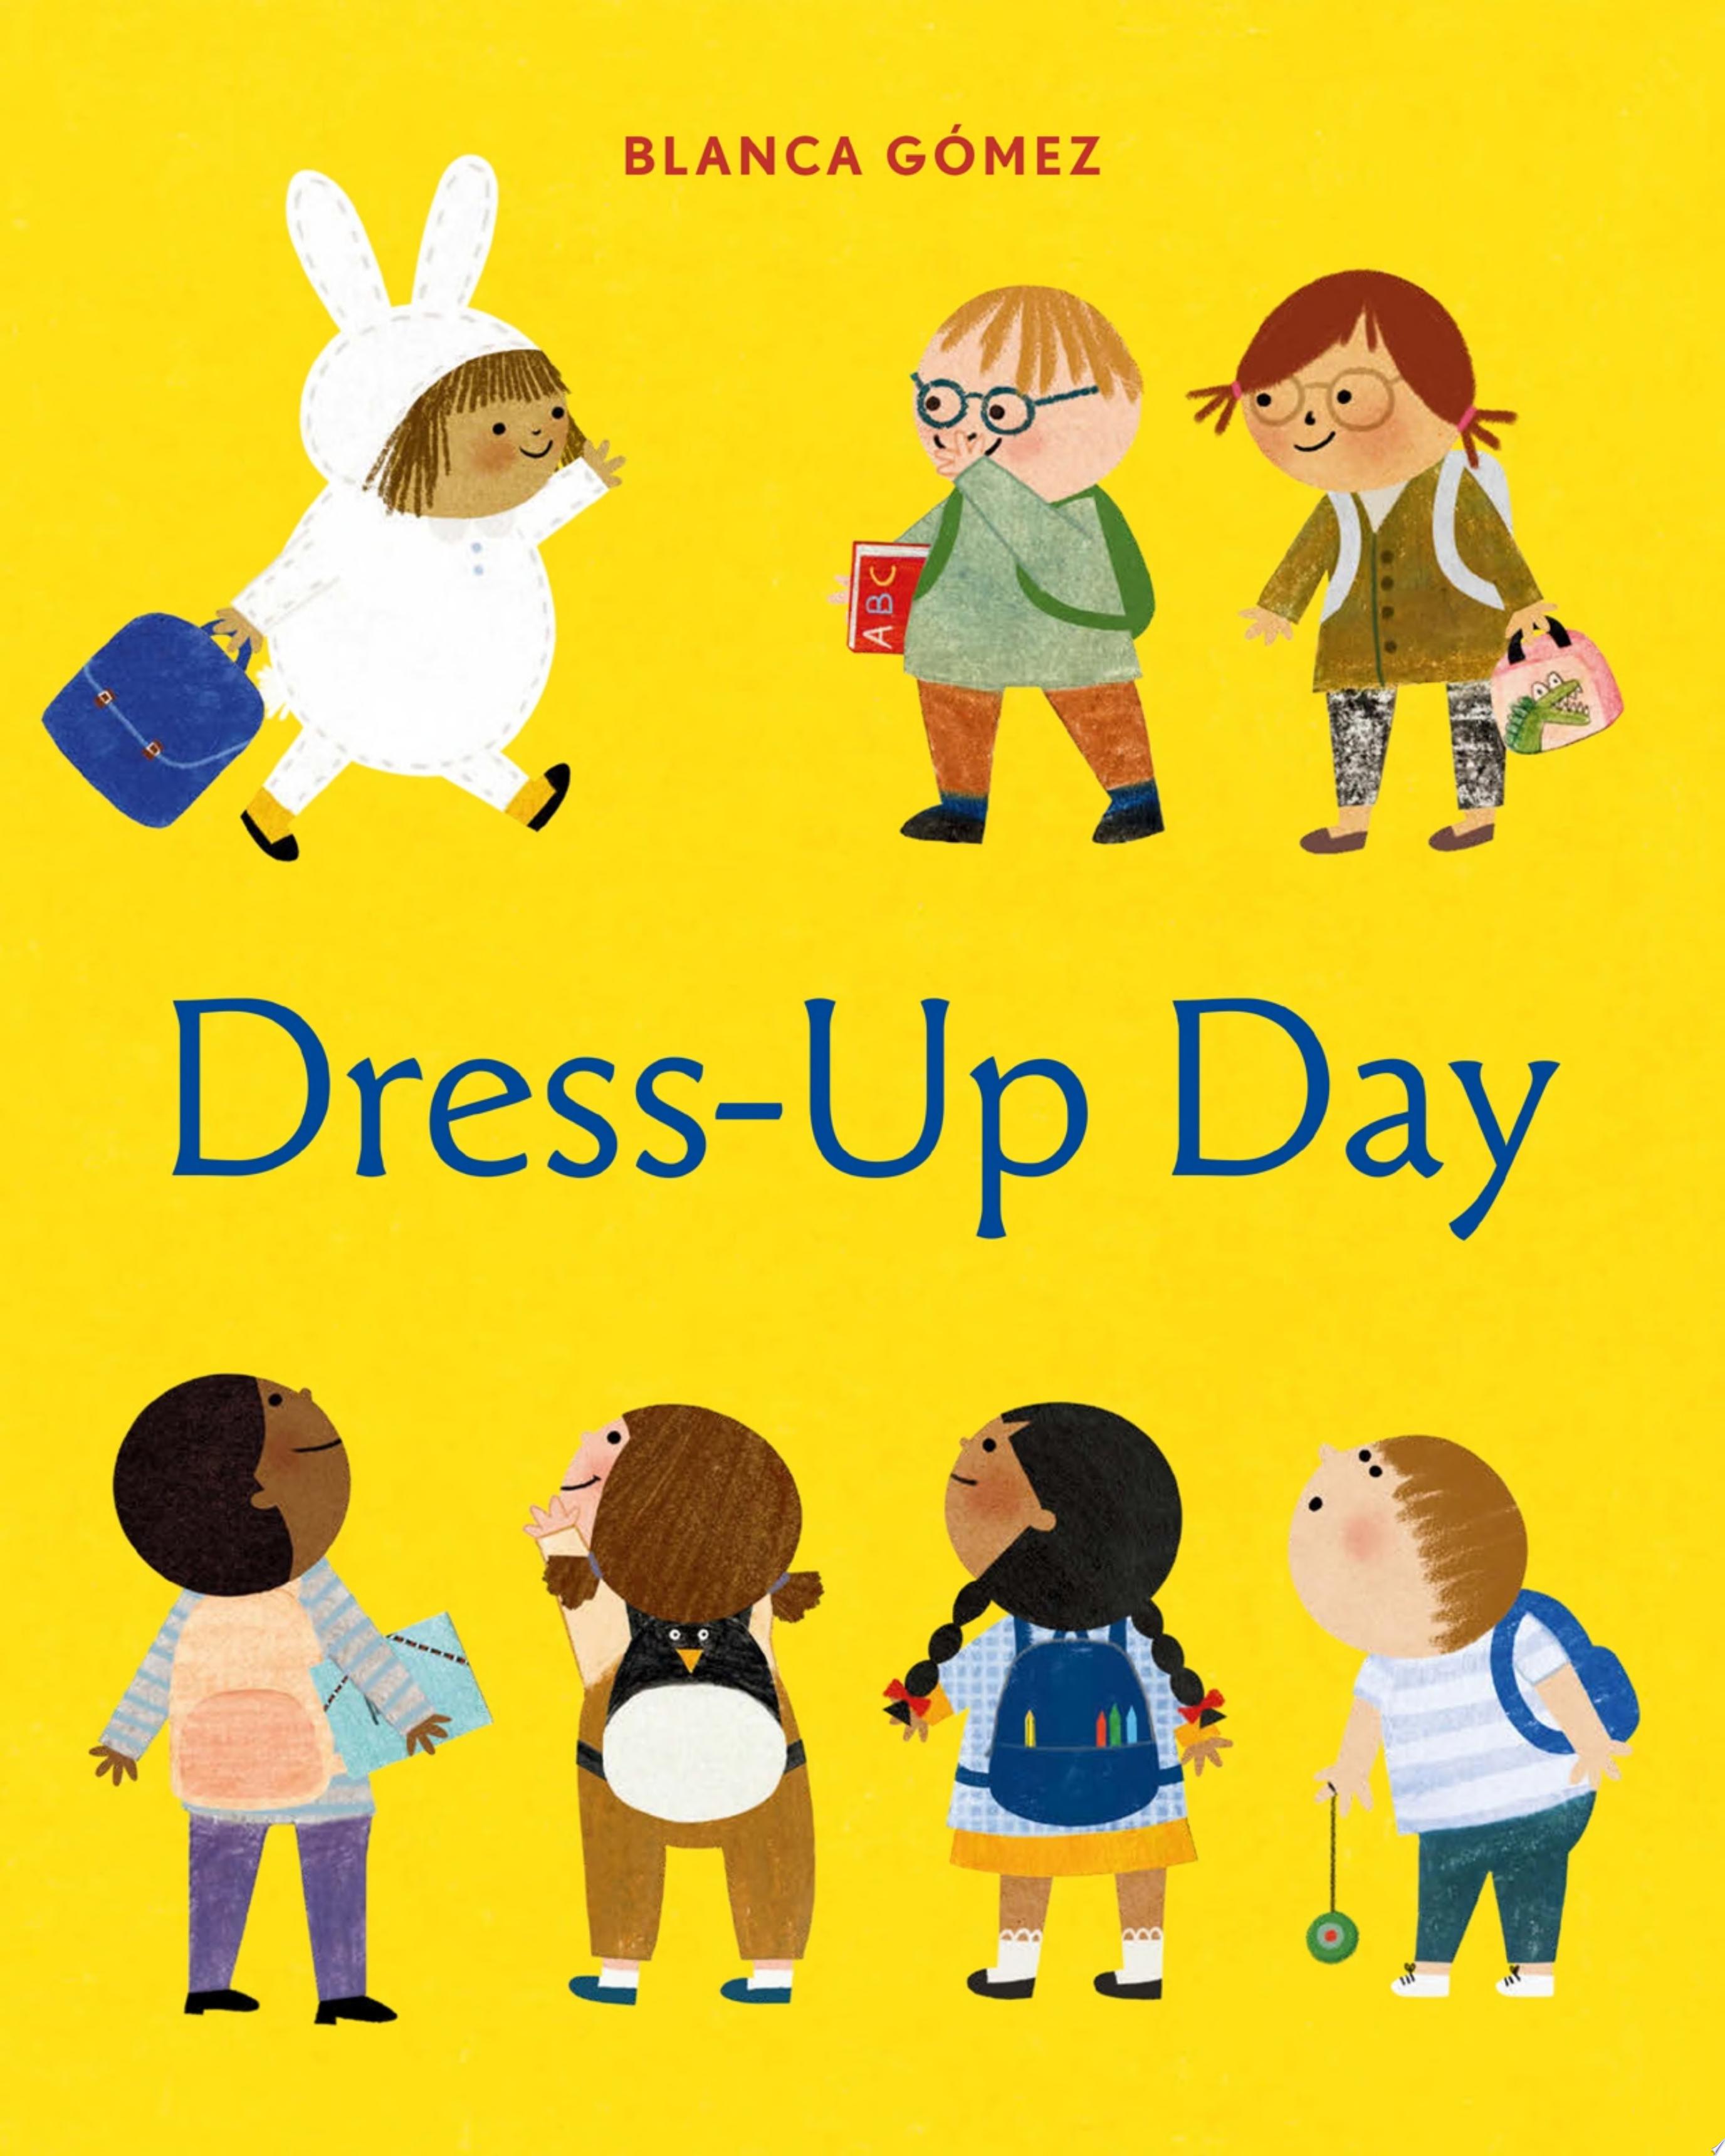 Image for "Dress-Up Day"